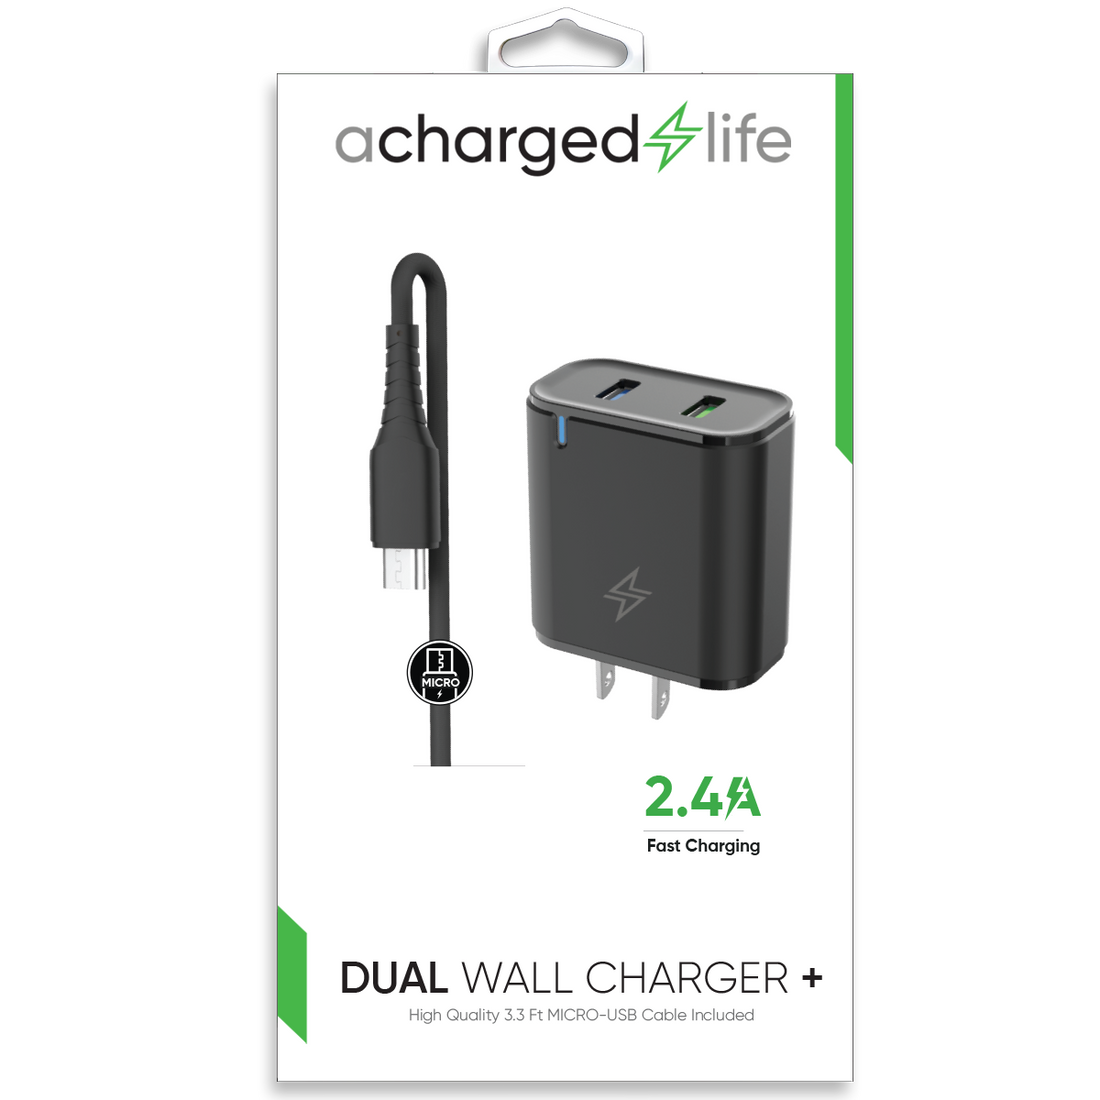 CL603B - Charging Cable Micro USB 3.3Ft w/Wall Charger 2.4A Black